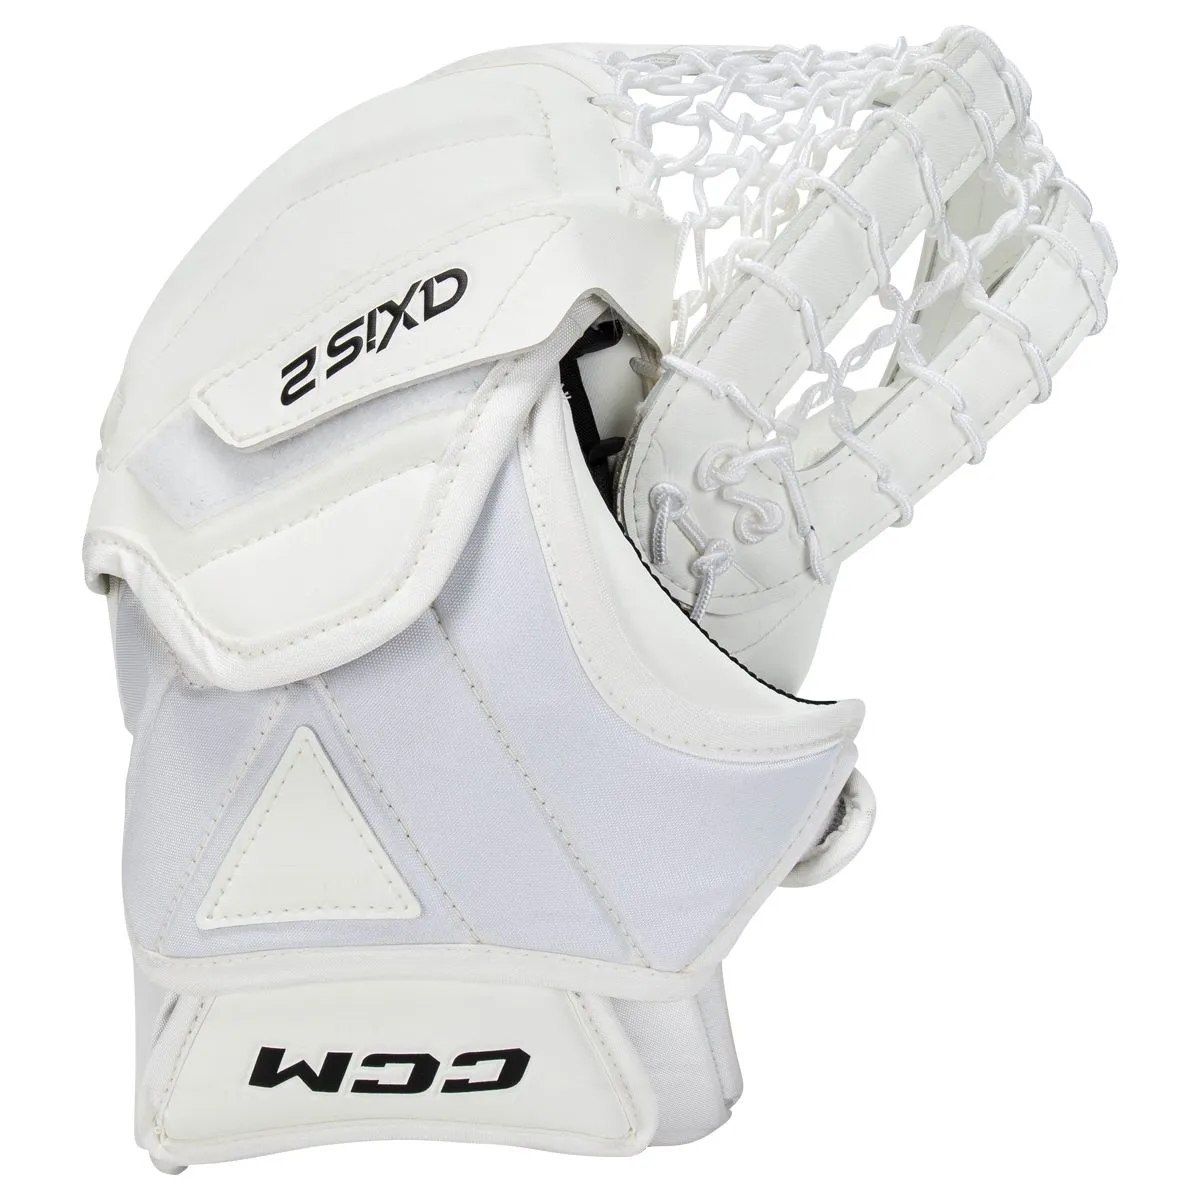 CCM AXIS 2 Sr. Goalie Gloveproduct zoom image #3